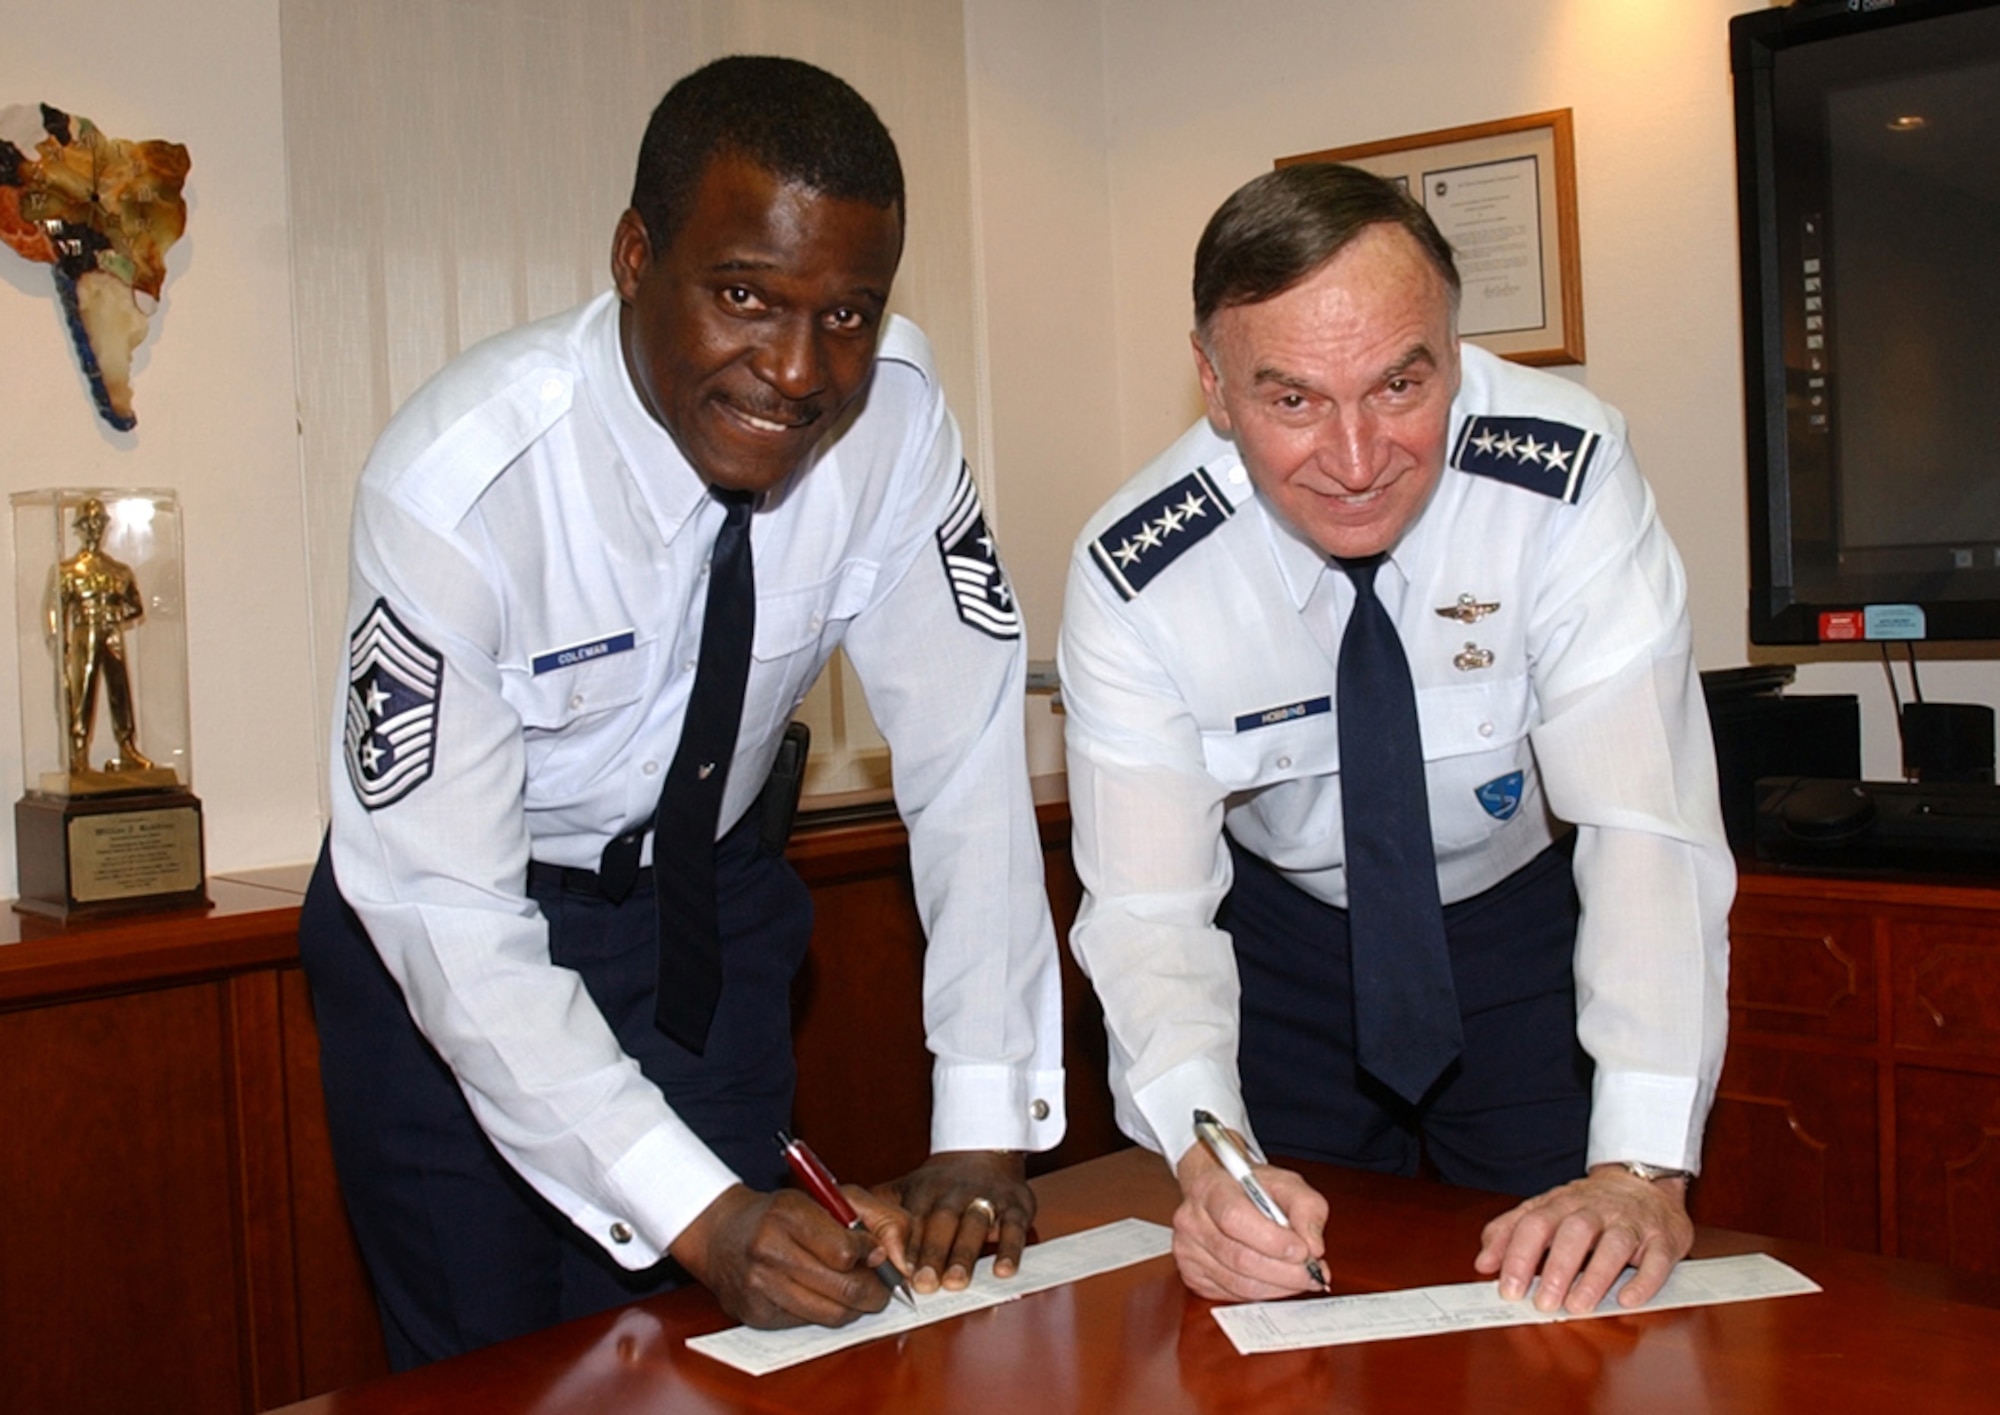 RAMSTEIN AIR BASE, Germany (USAFENS) -- Gen. Tom Hobbins, U.S. Air Forces in Europe commander, and Chief Master Sgt. Gary Coleman, USAFE command chief master sergeant, signed Air Force Assistance Fund forms here recently. This year's Air Force Assistance Fund "Commitment to Caring" campaign, from Feb. 13 to May 5, will provide Airmen the opportunity to contribute to any of the four official Air Force charitable organizations. (Photo by Master Sgt. David Underwood)